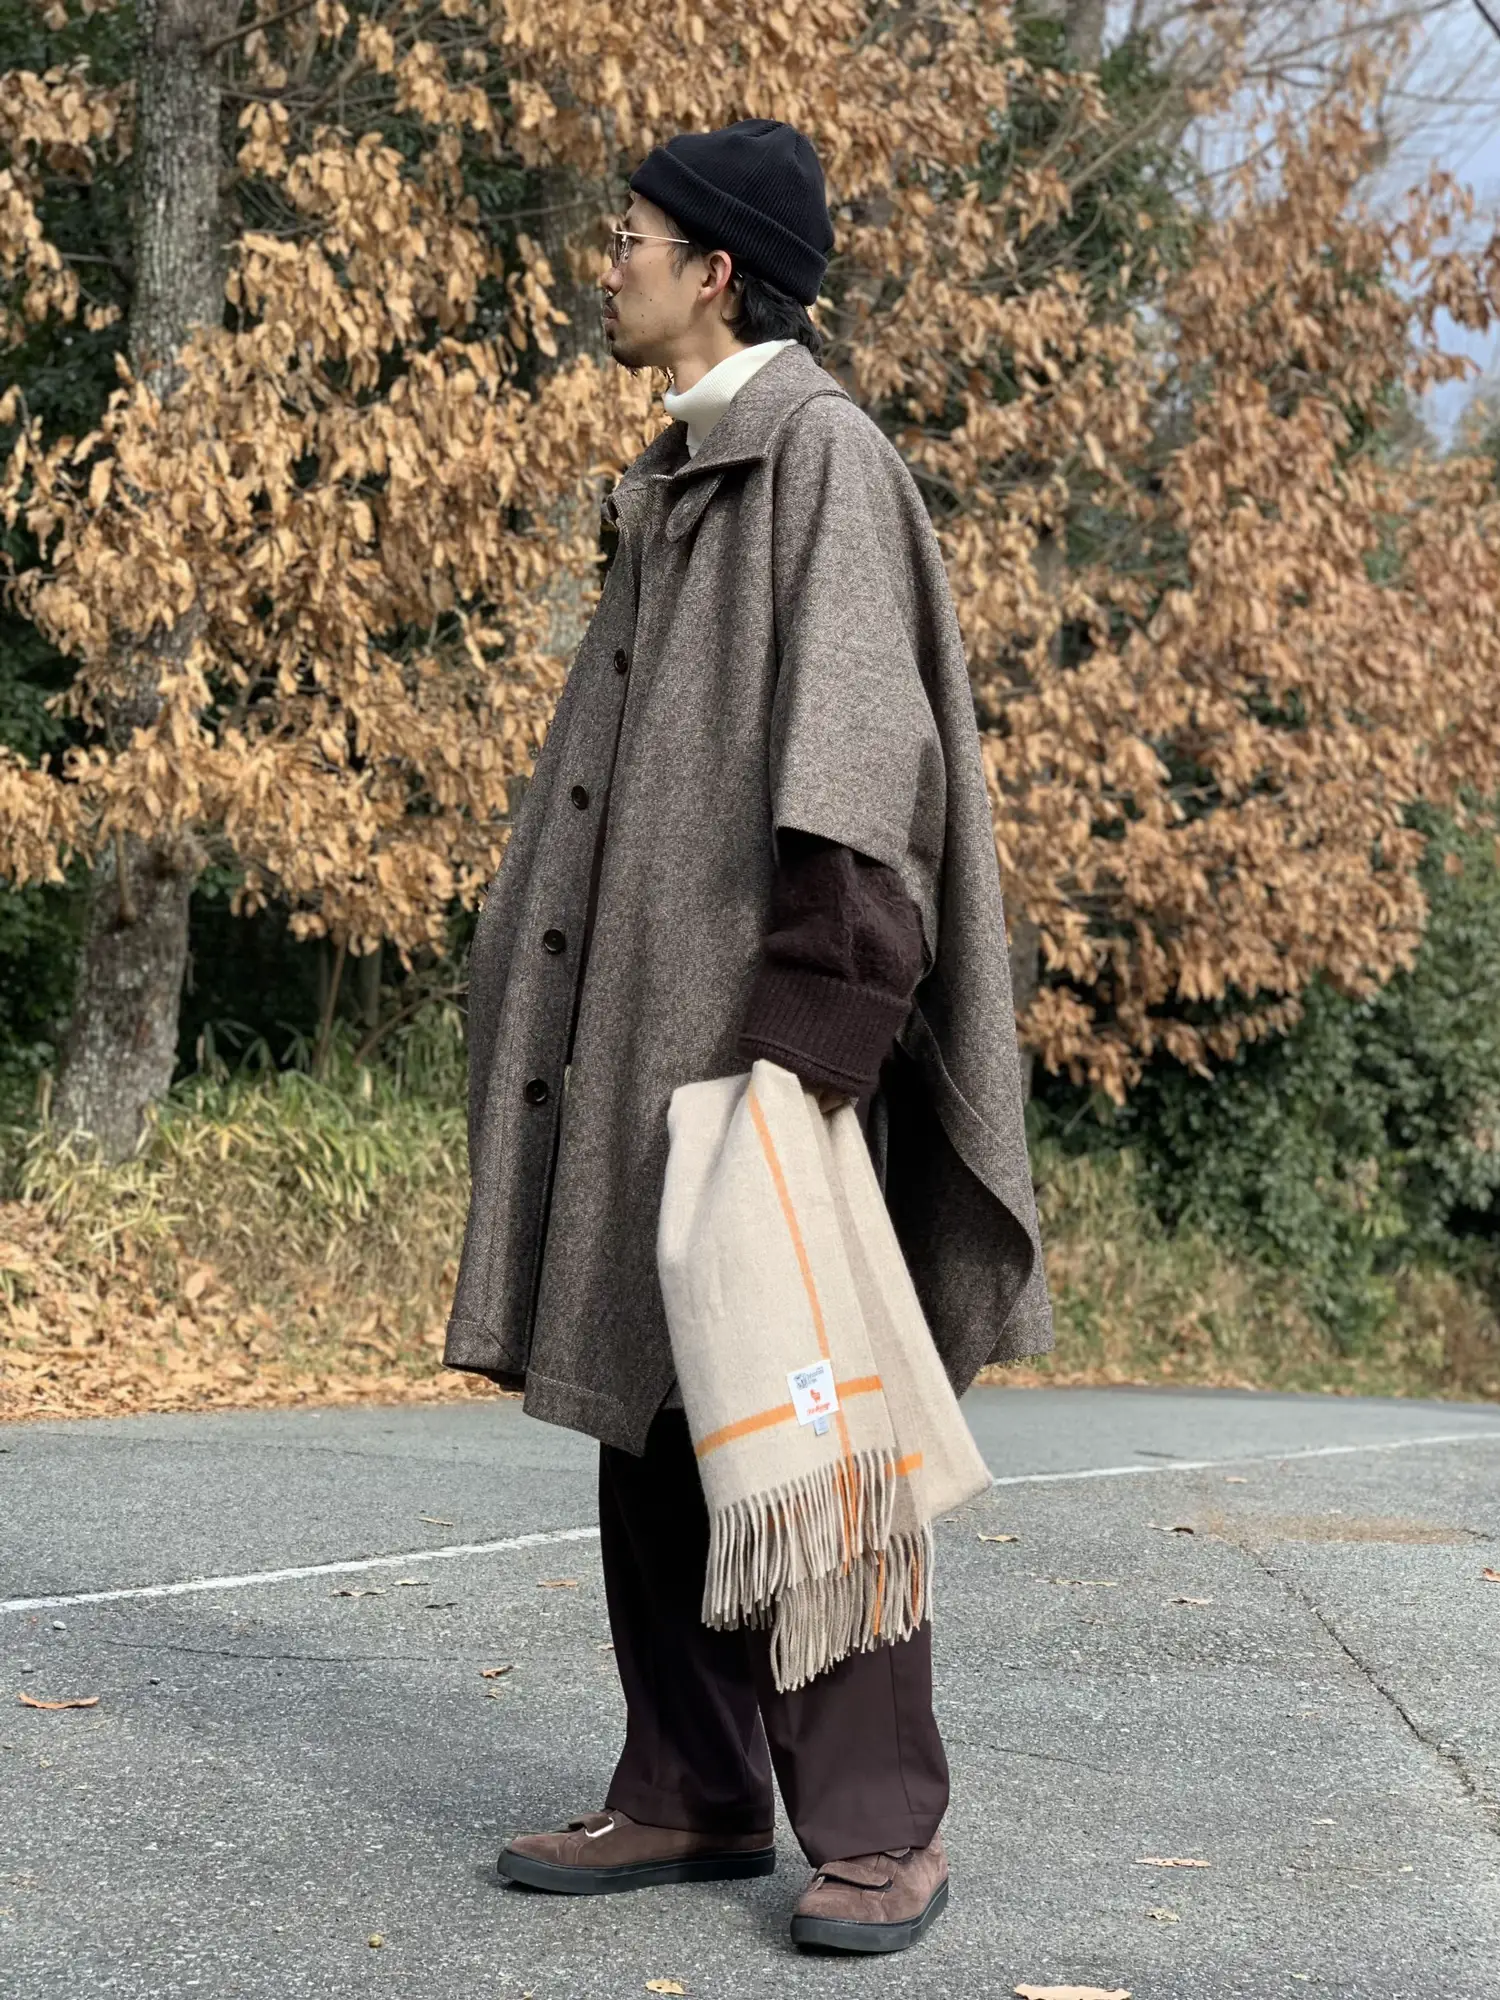 Winter cape coat coordination with brown as the main axis